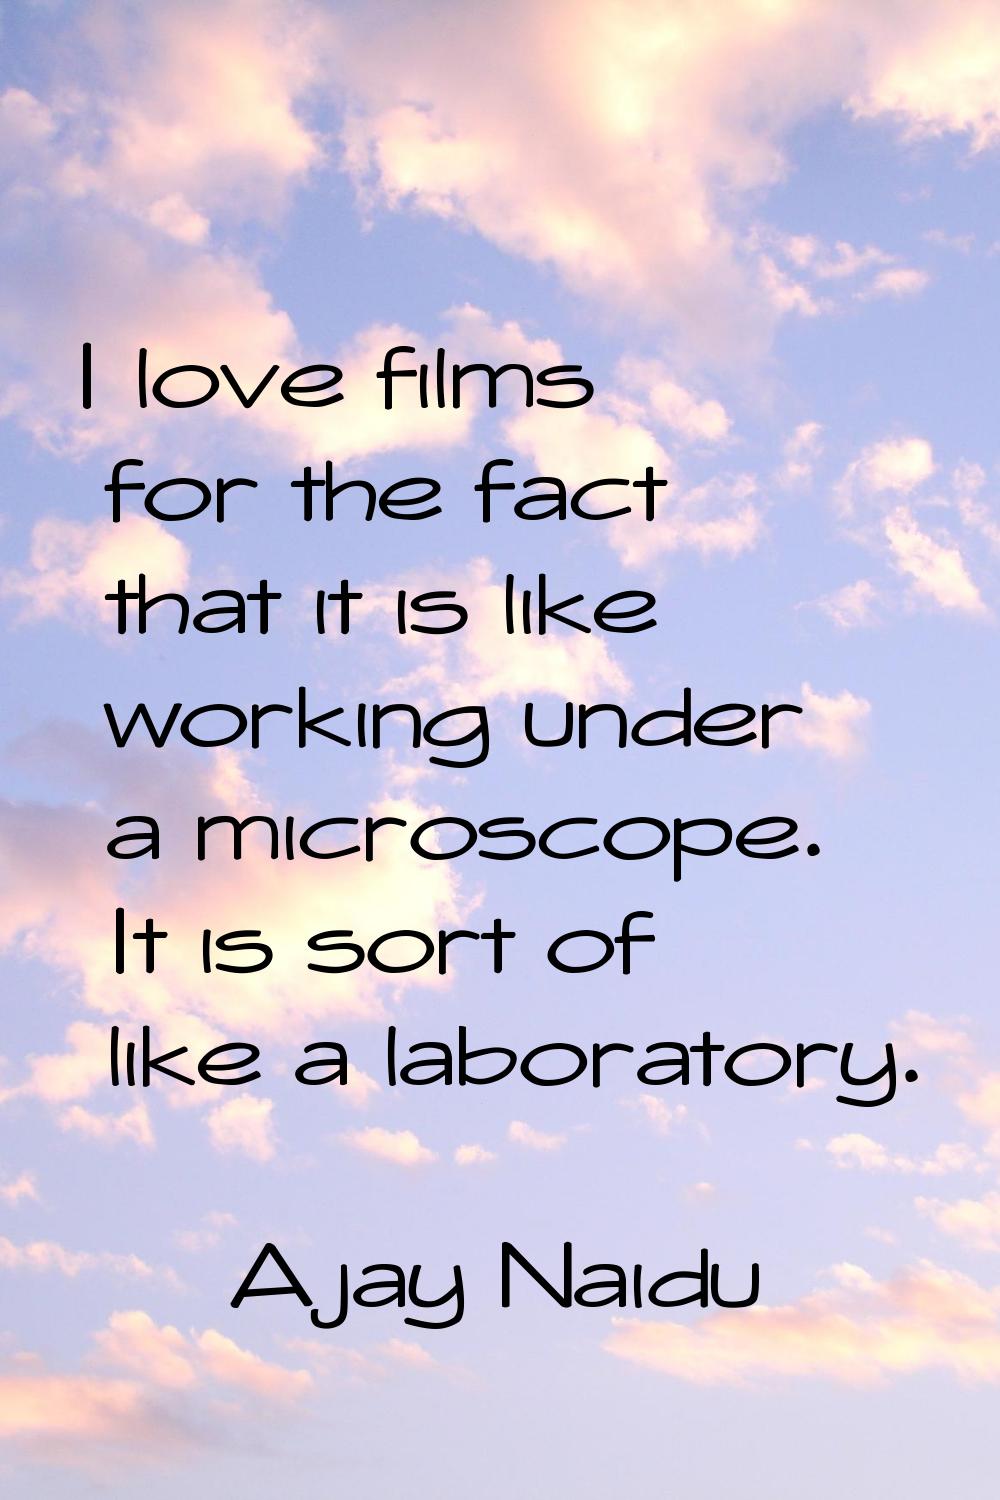 I love films for the fact that it is like working under a microscope. It is sort of like a laborato